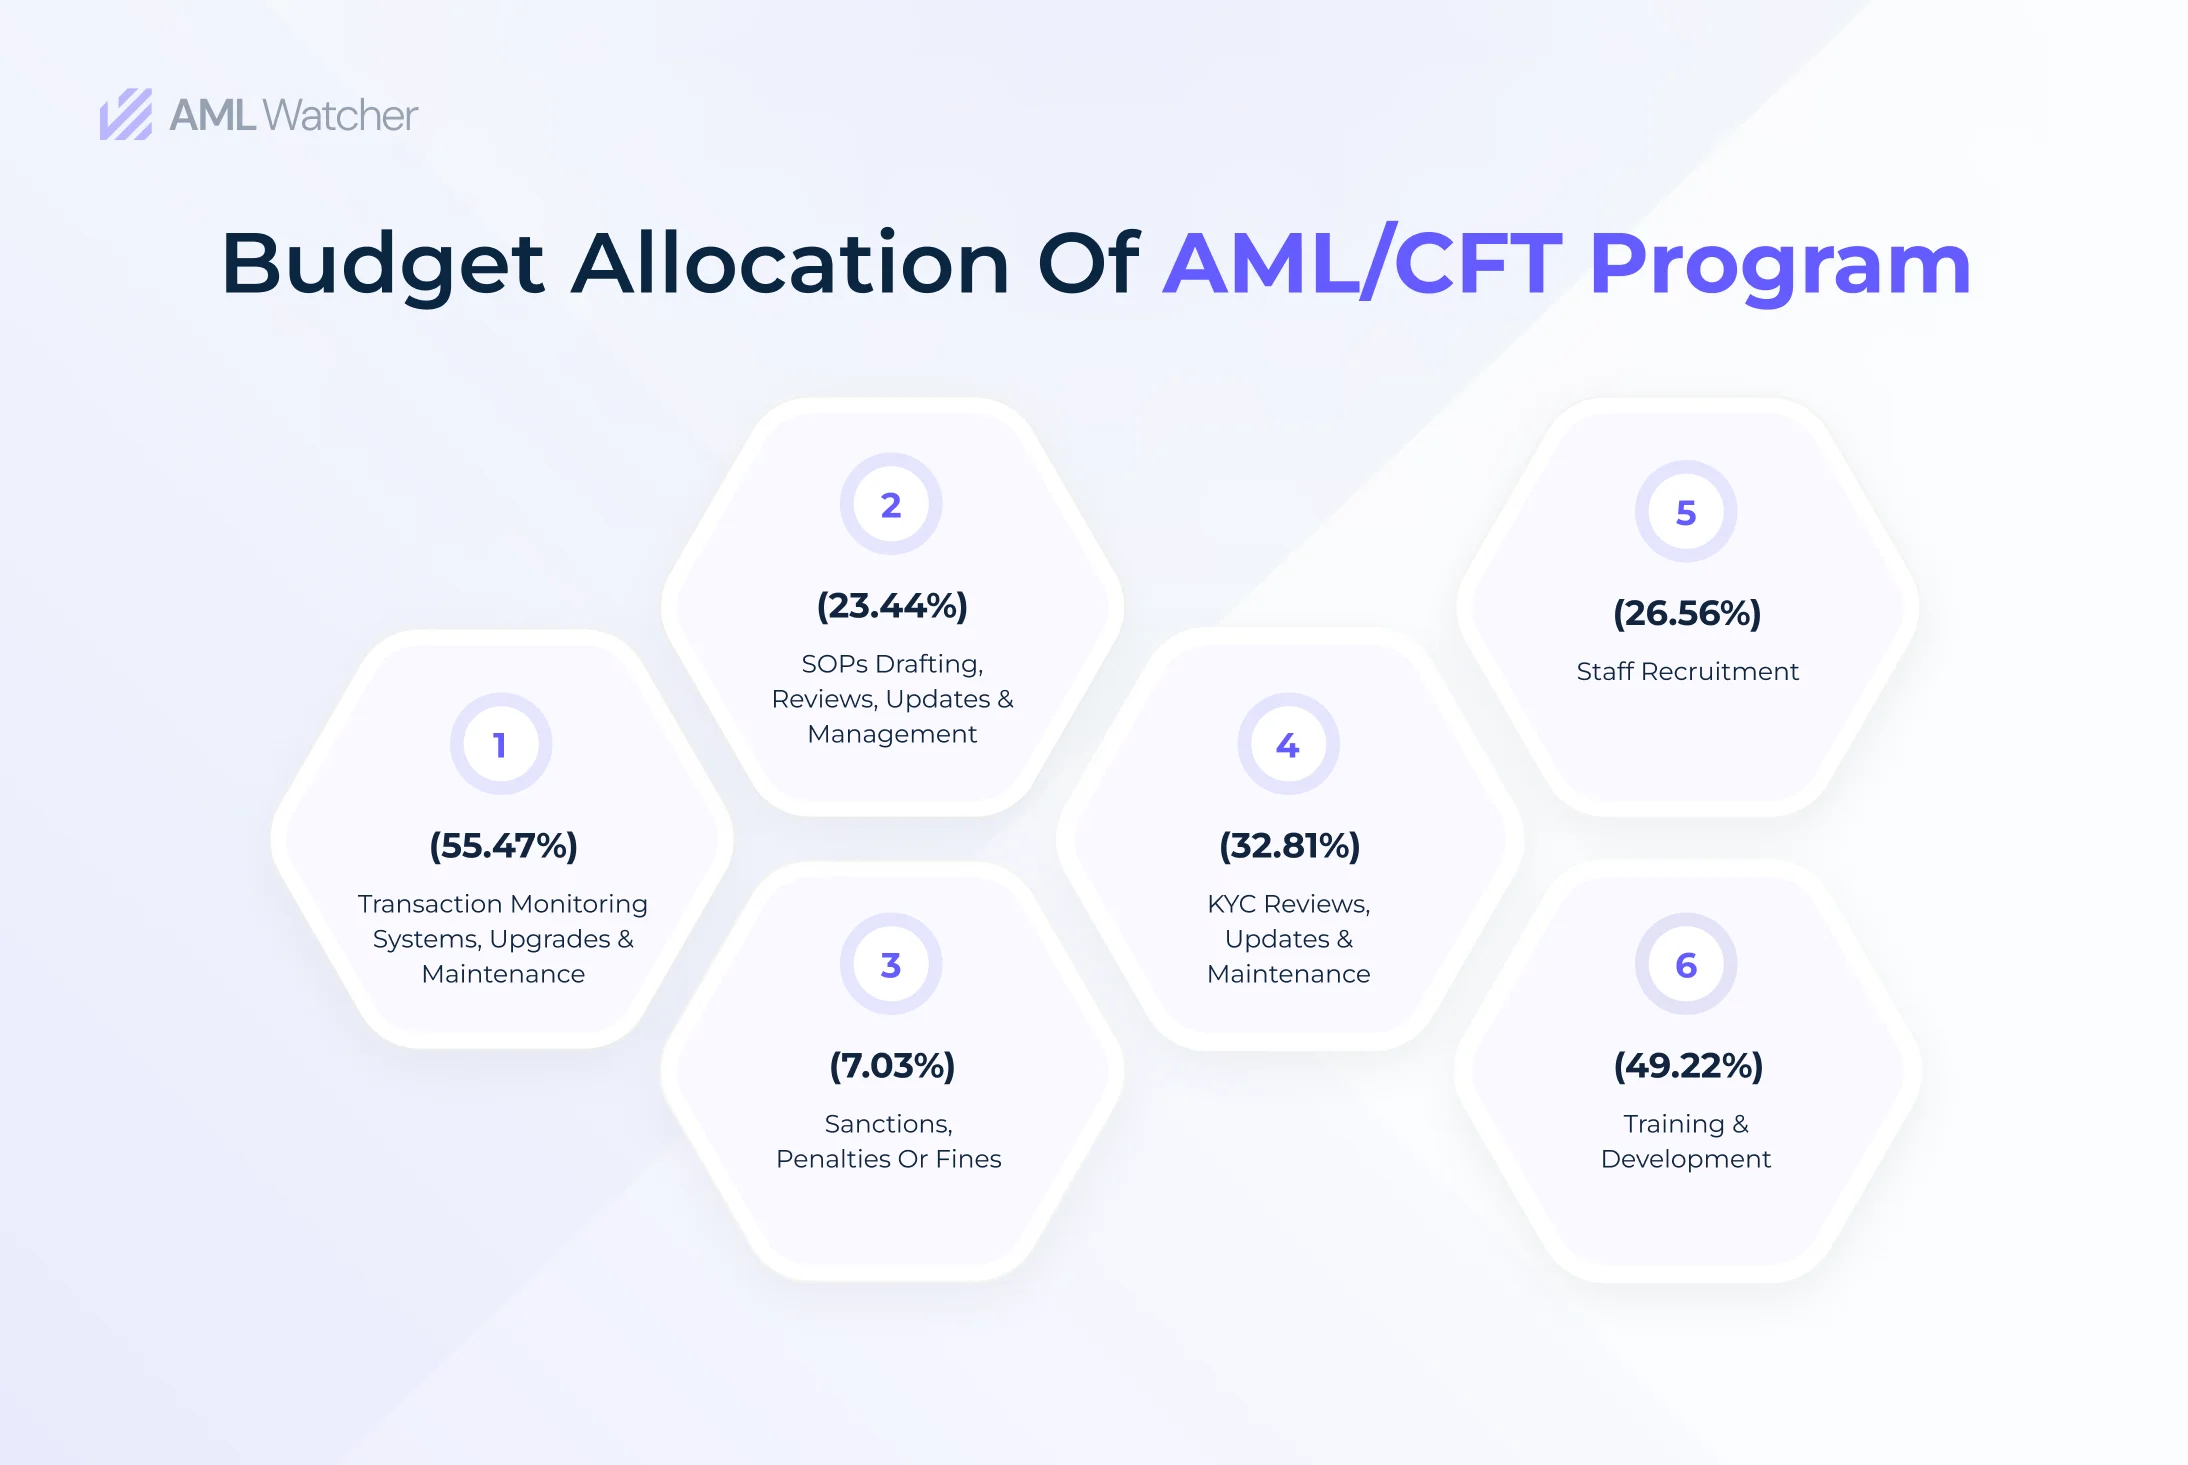 A survey report from MENA FCCG showcasing the budget allocation of AML/CFT departments.